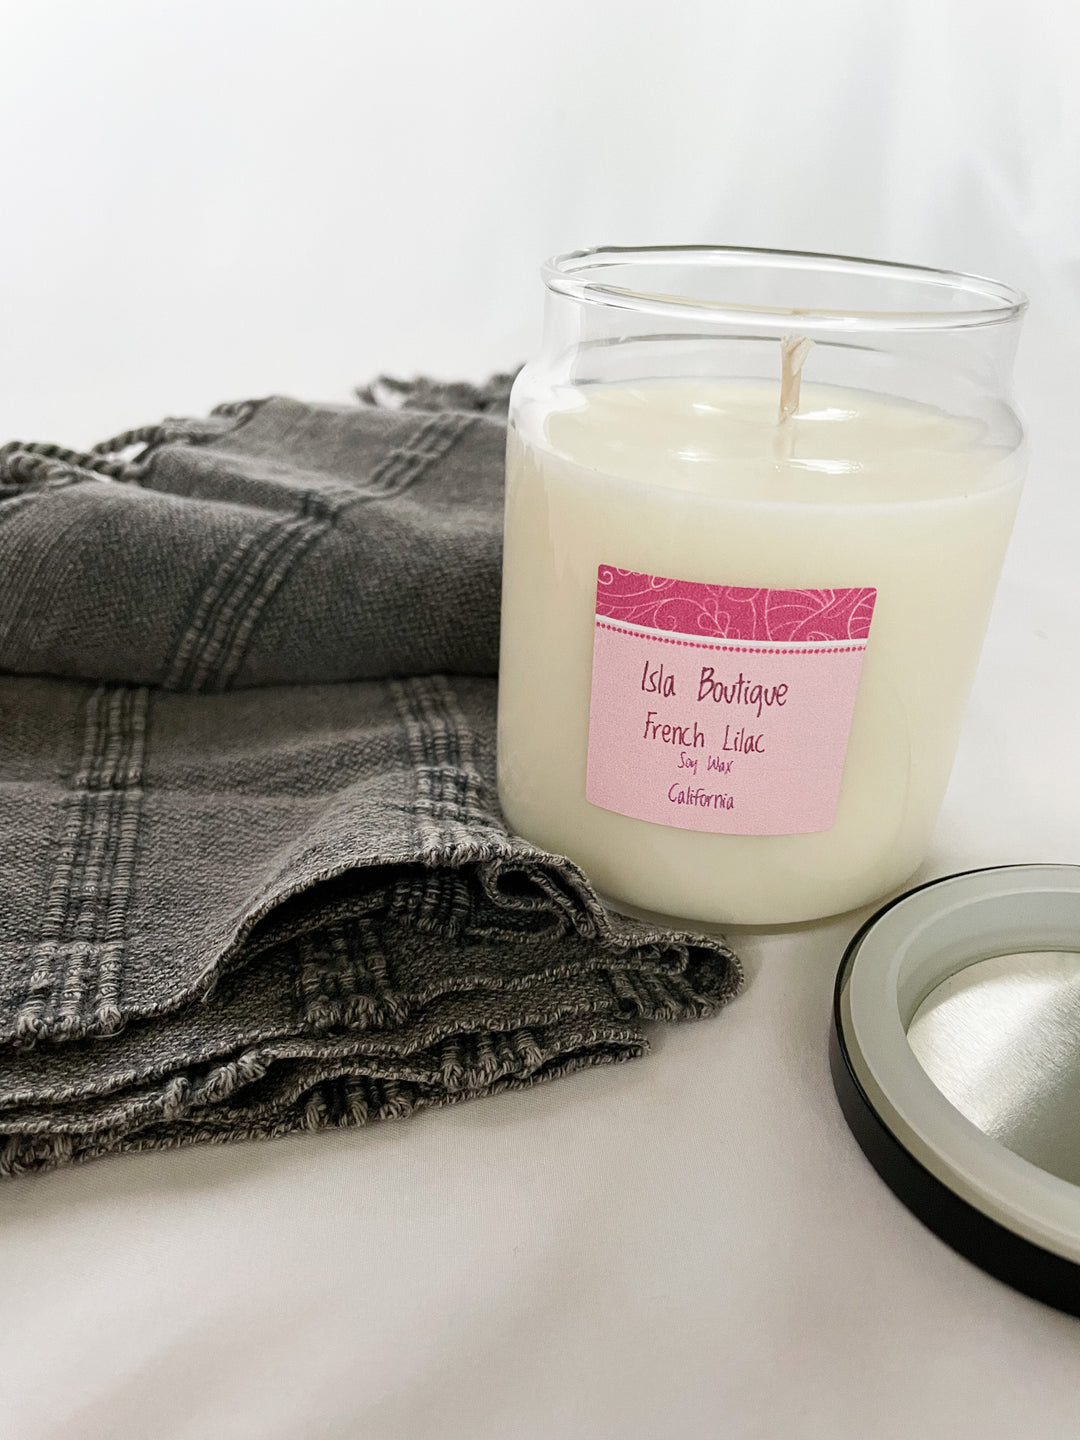 french lilac scented soy candle with grey tea towel